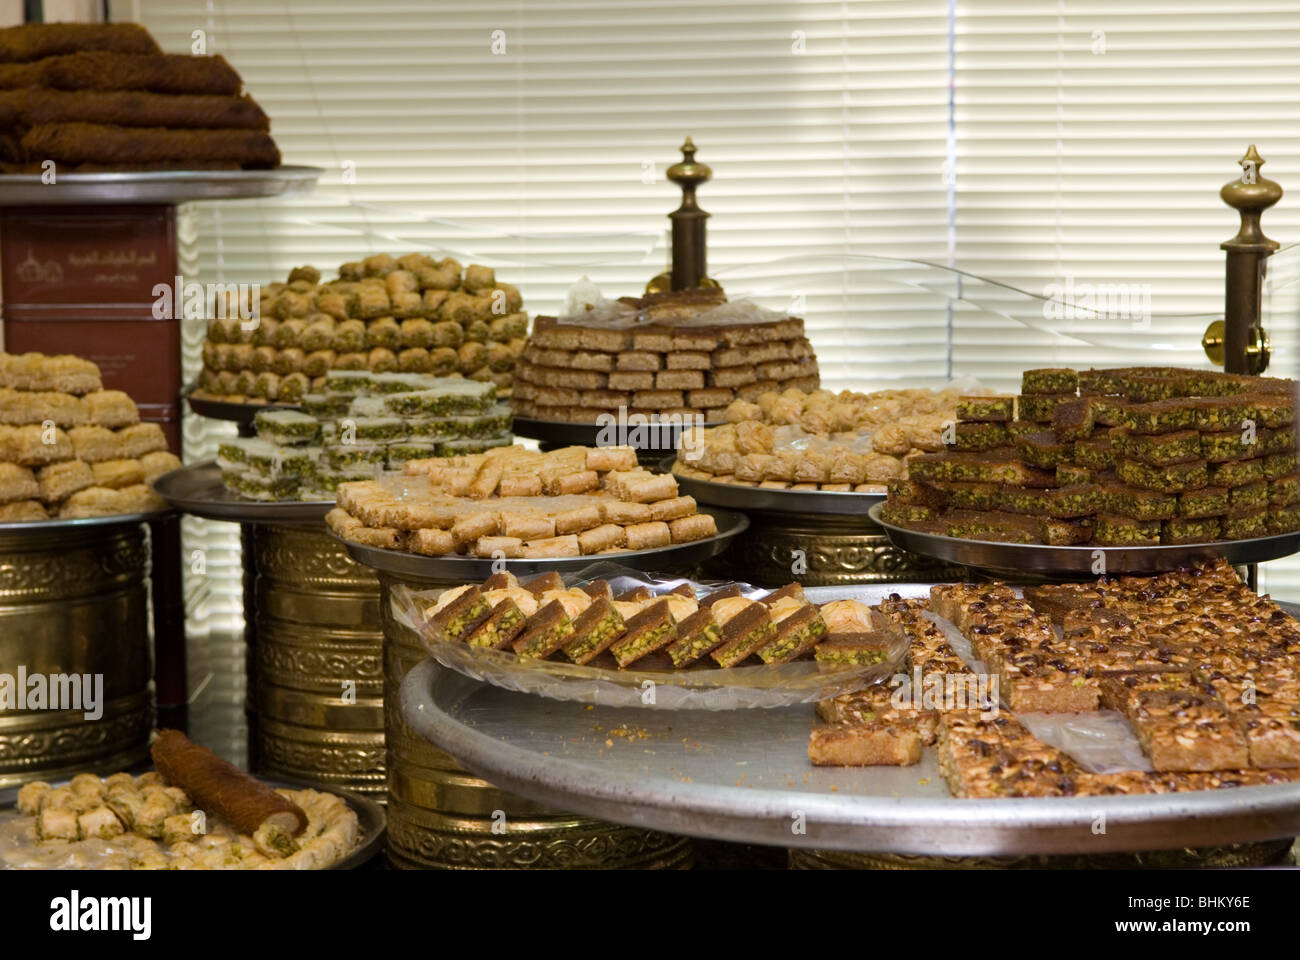 Middle eastern dessert in shop in Lebanon Middle East Asia Stock Photo